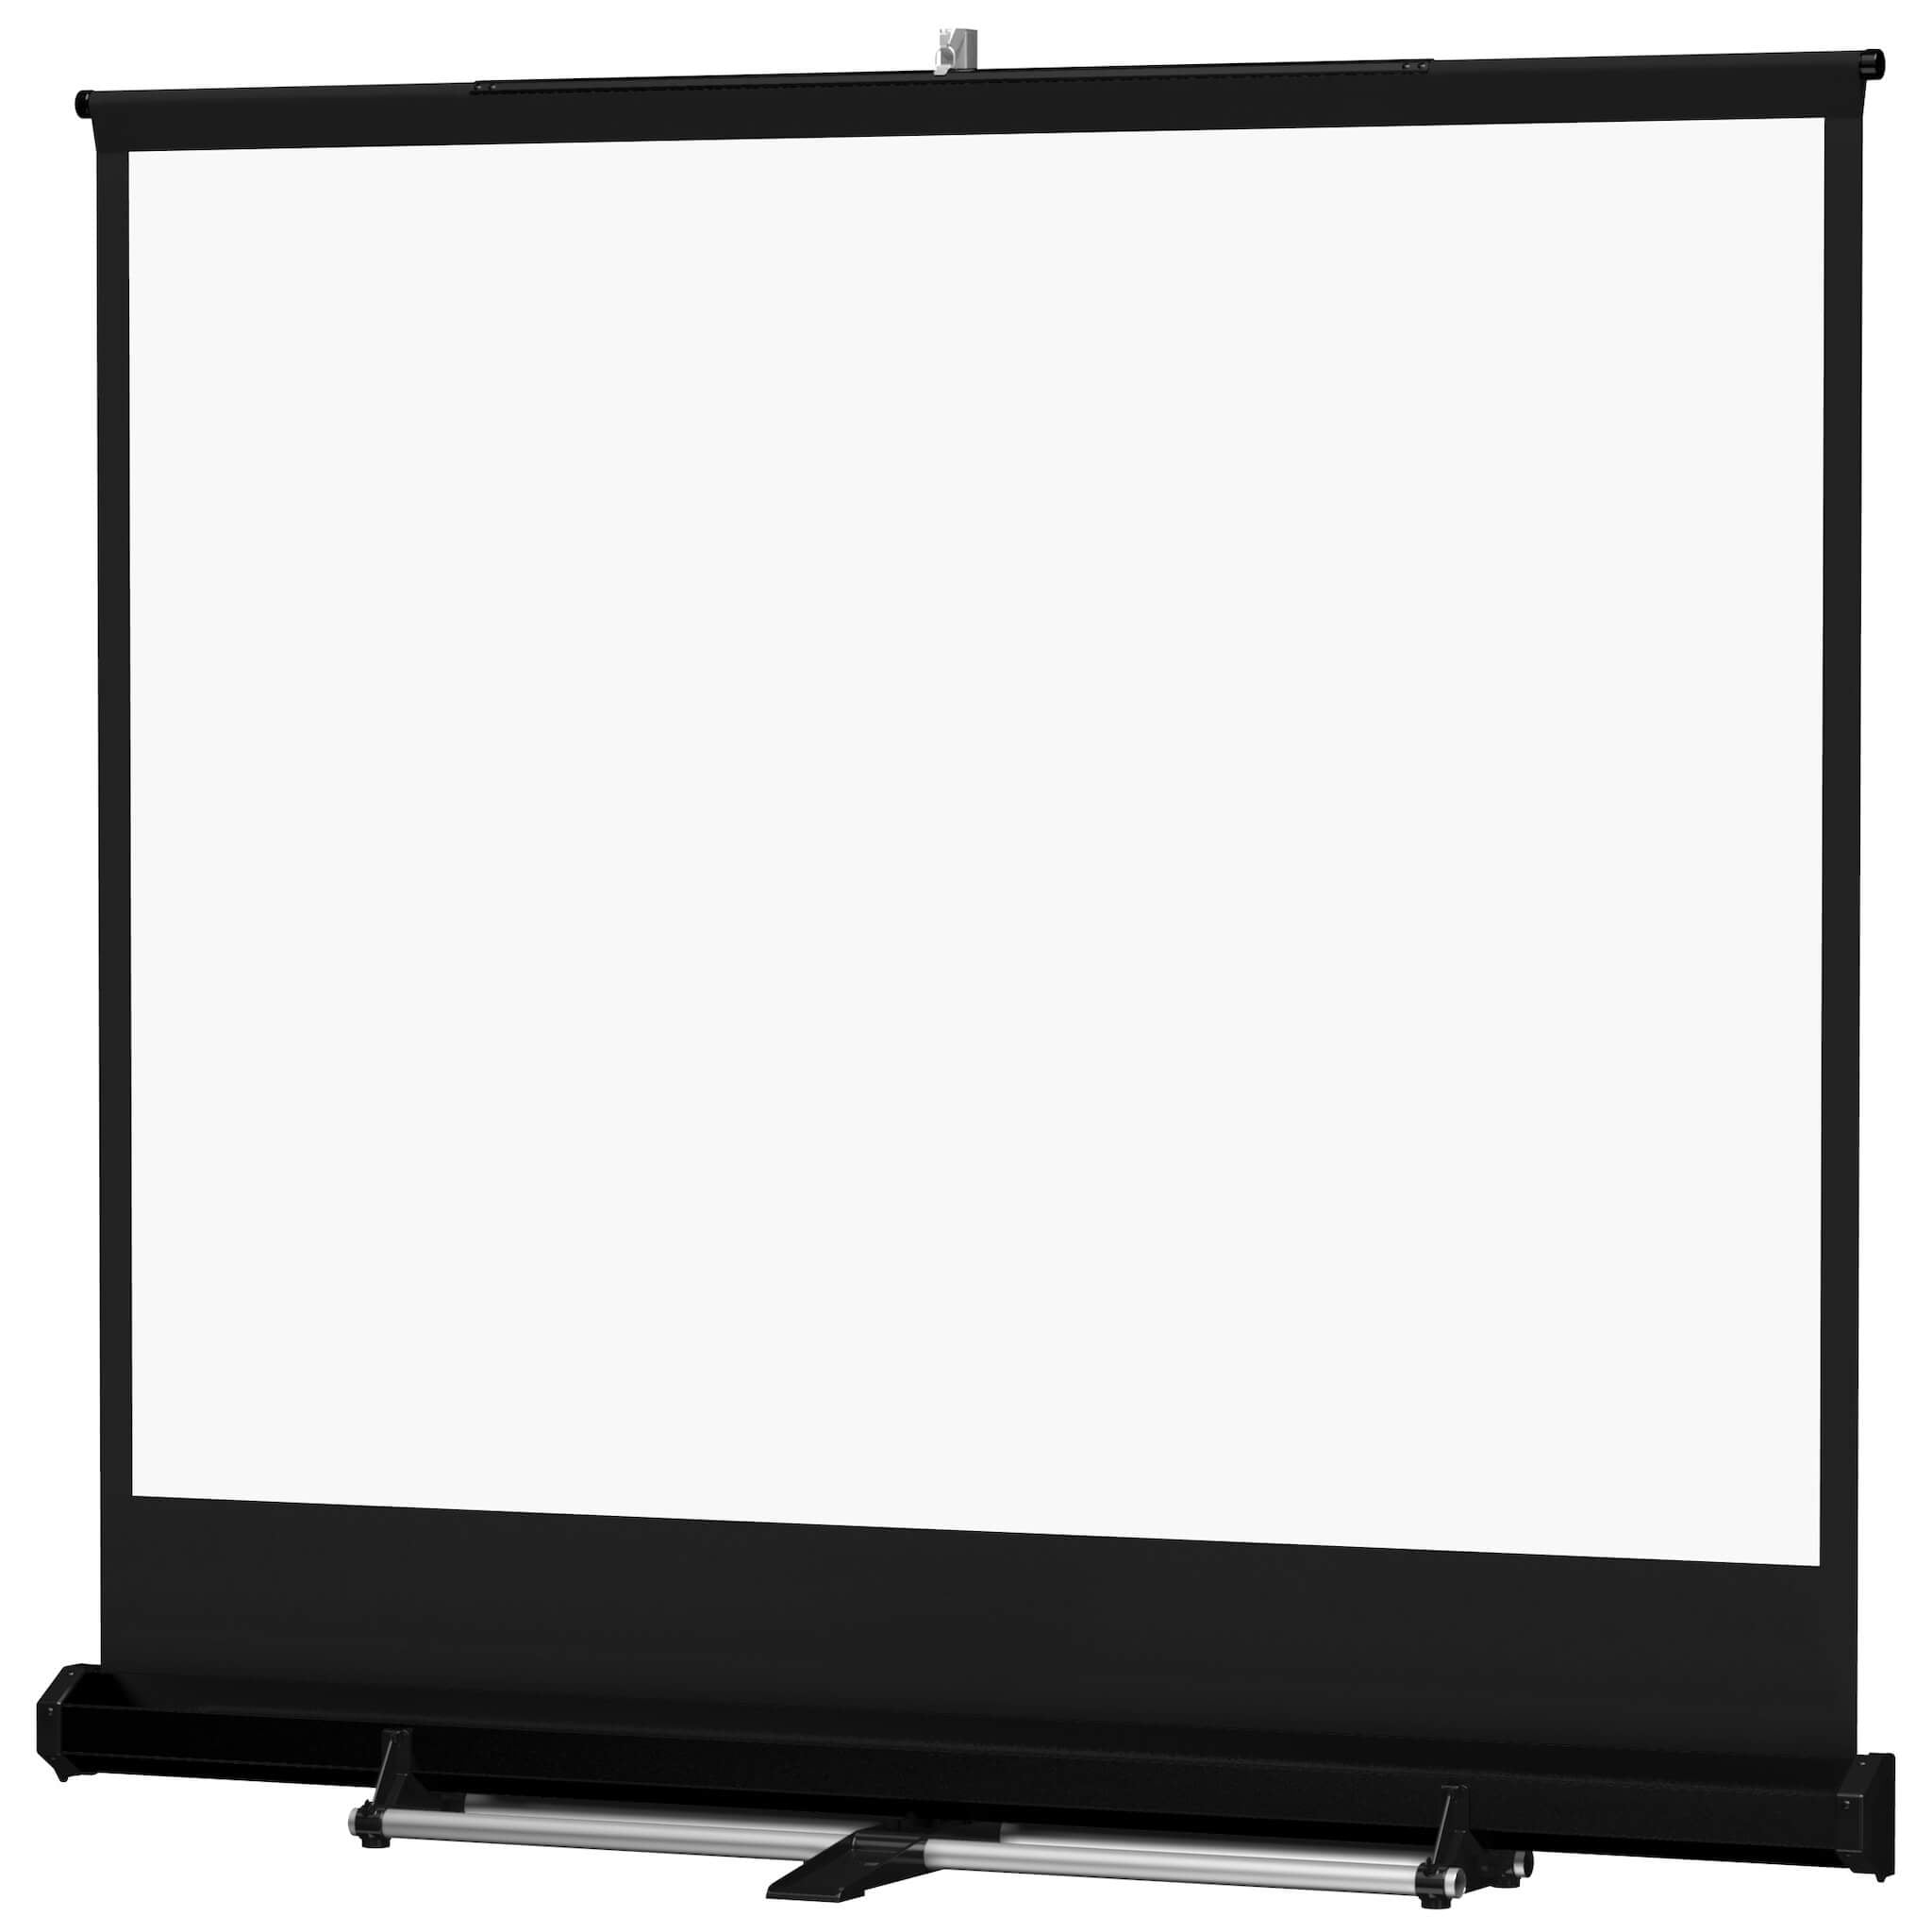 Da-Lite Floor Model C - Heavy-Duty Pull-Up Screen for Rental and Stage, black powder-coated